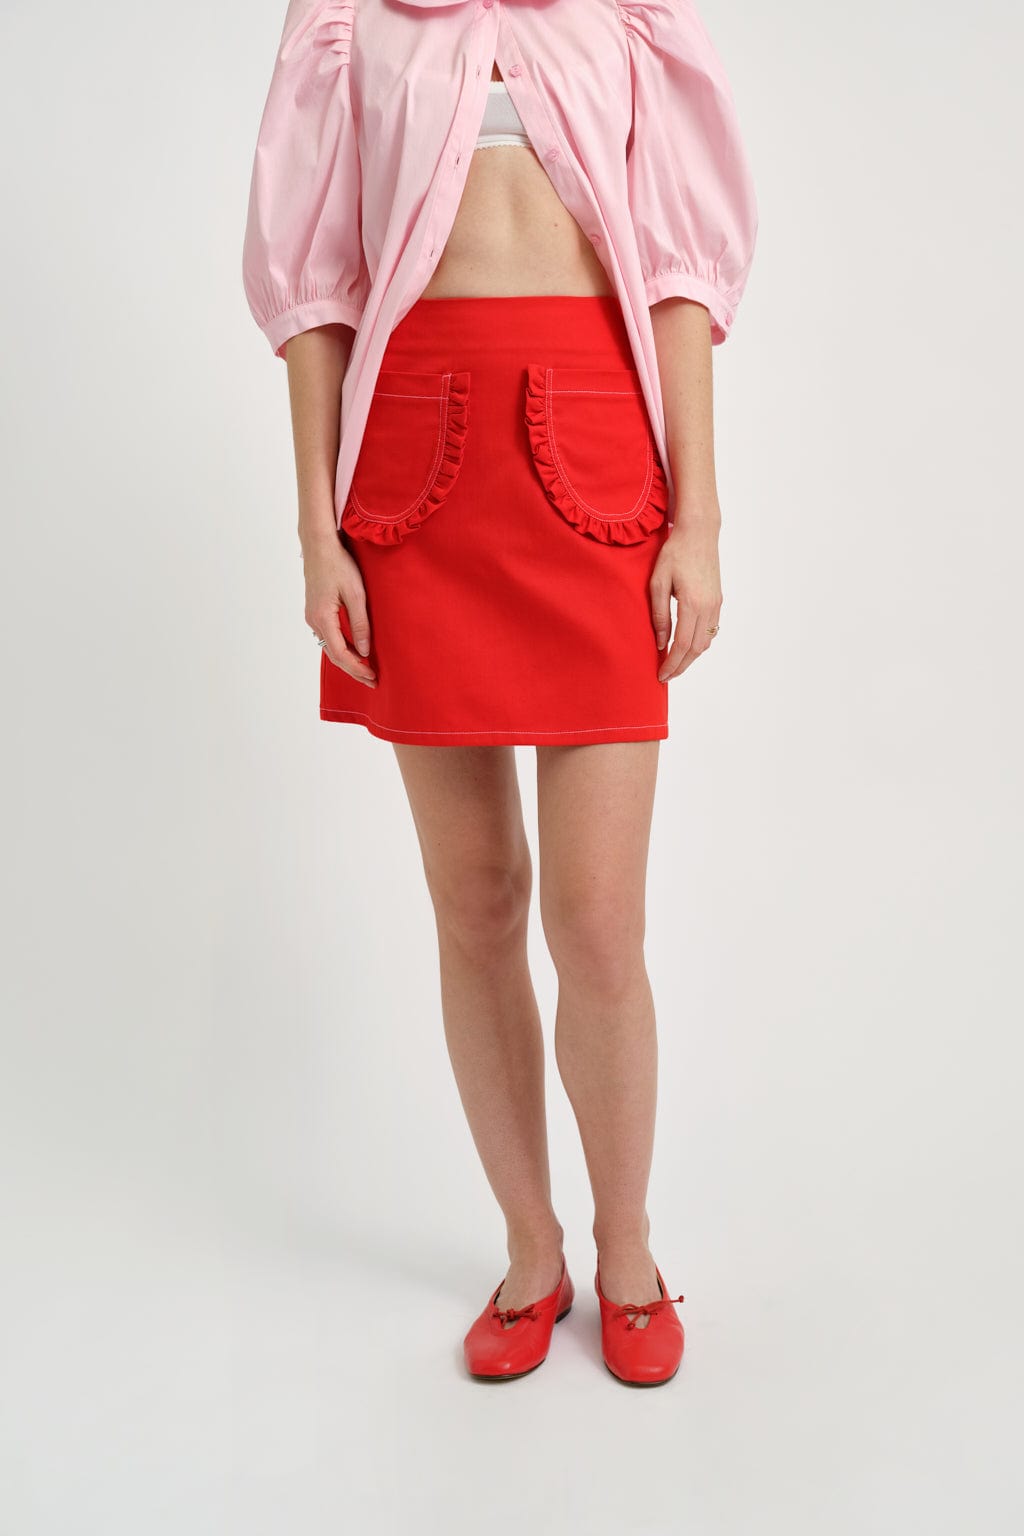 Tate Skirt in Red Twill